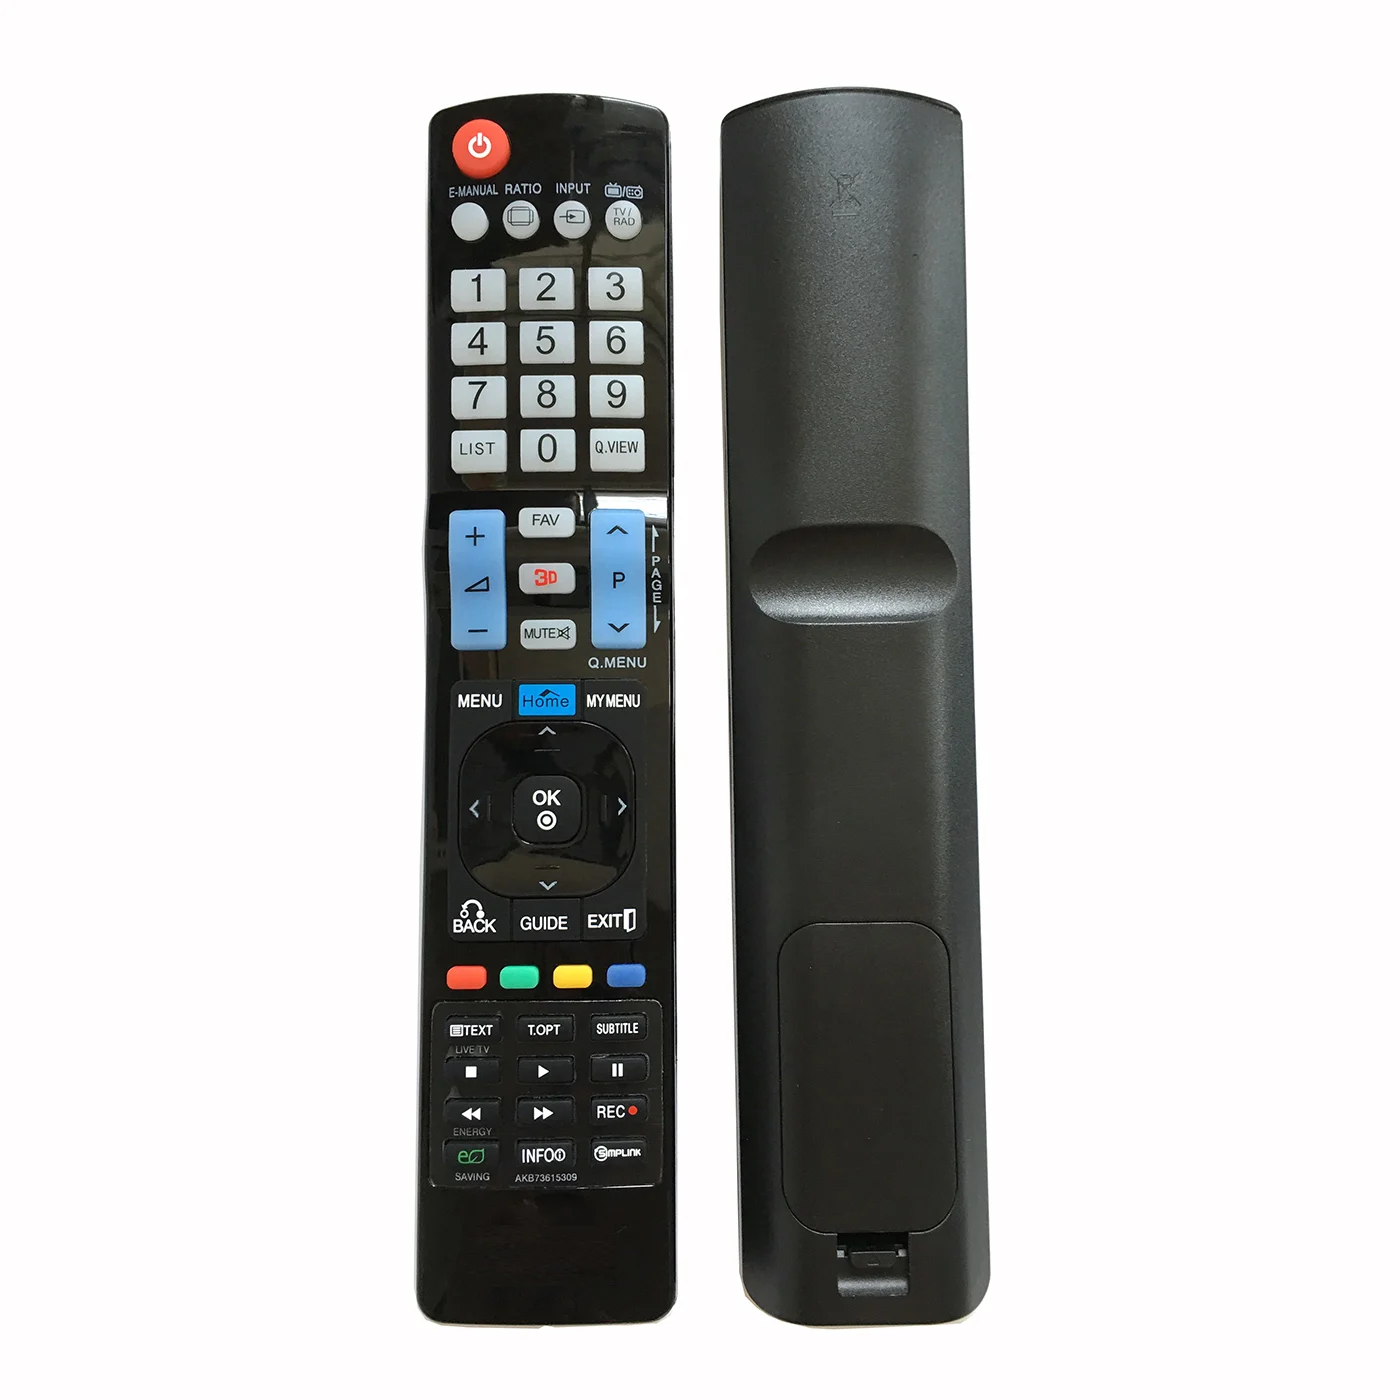 Tv 47lm8600 50pm4700 50pm6700 55lm6200 55lm6410 55lm6700